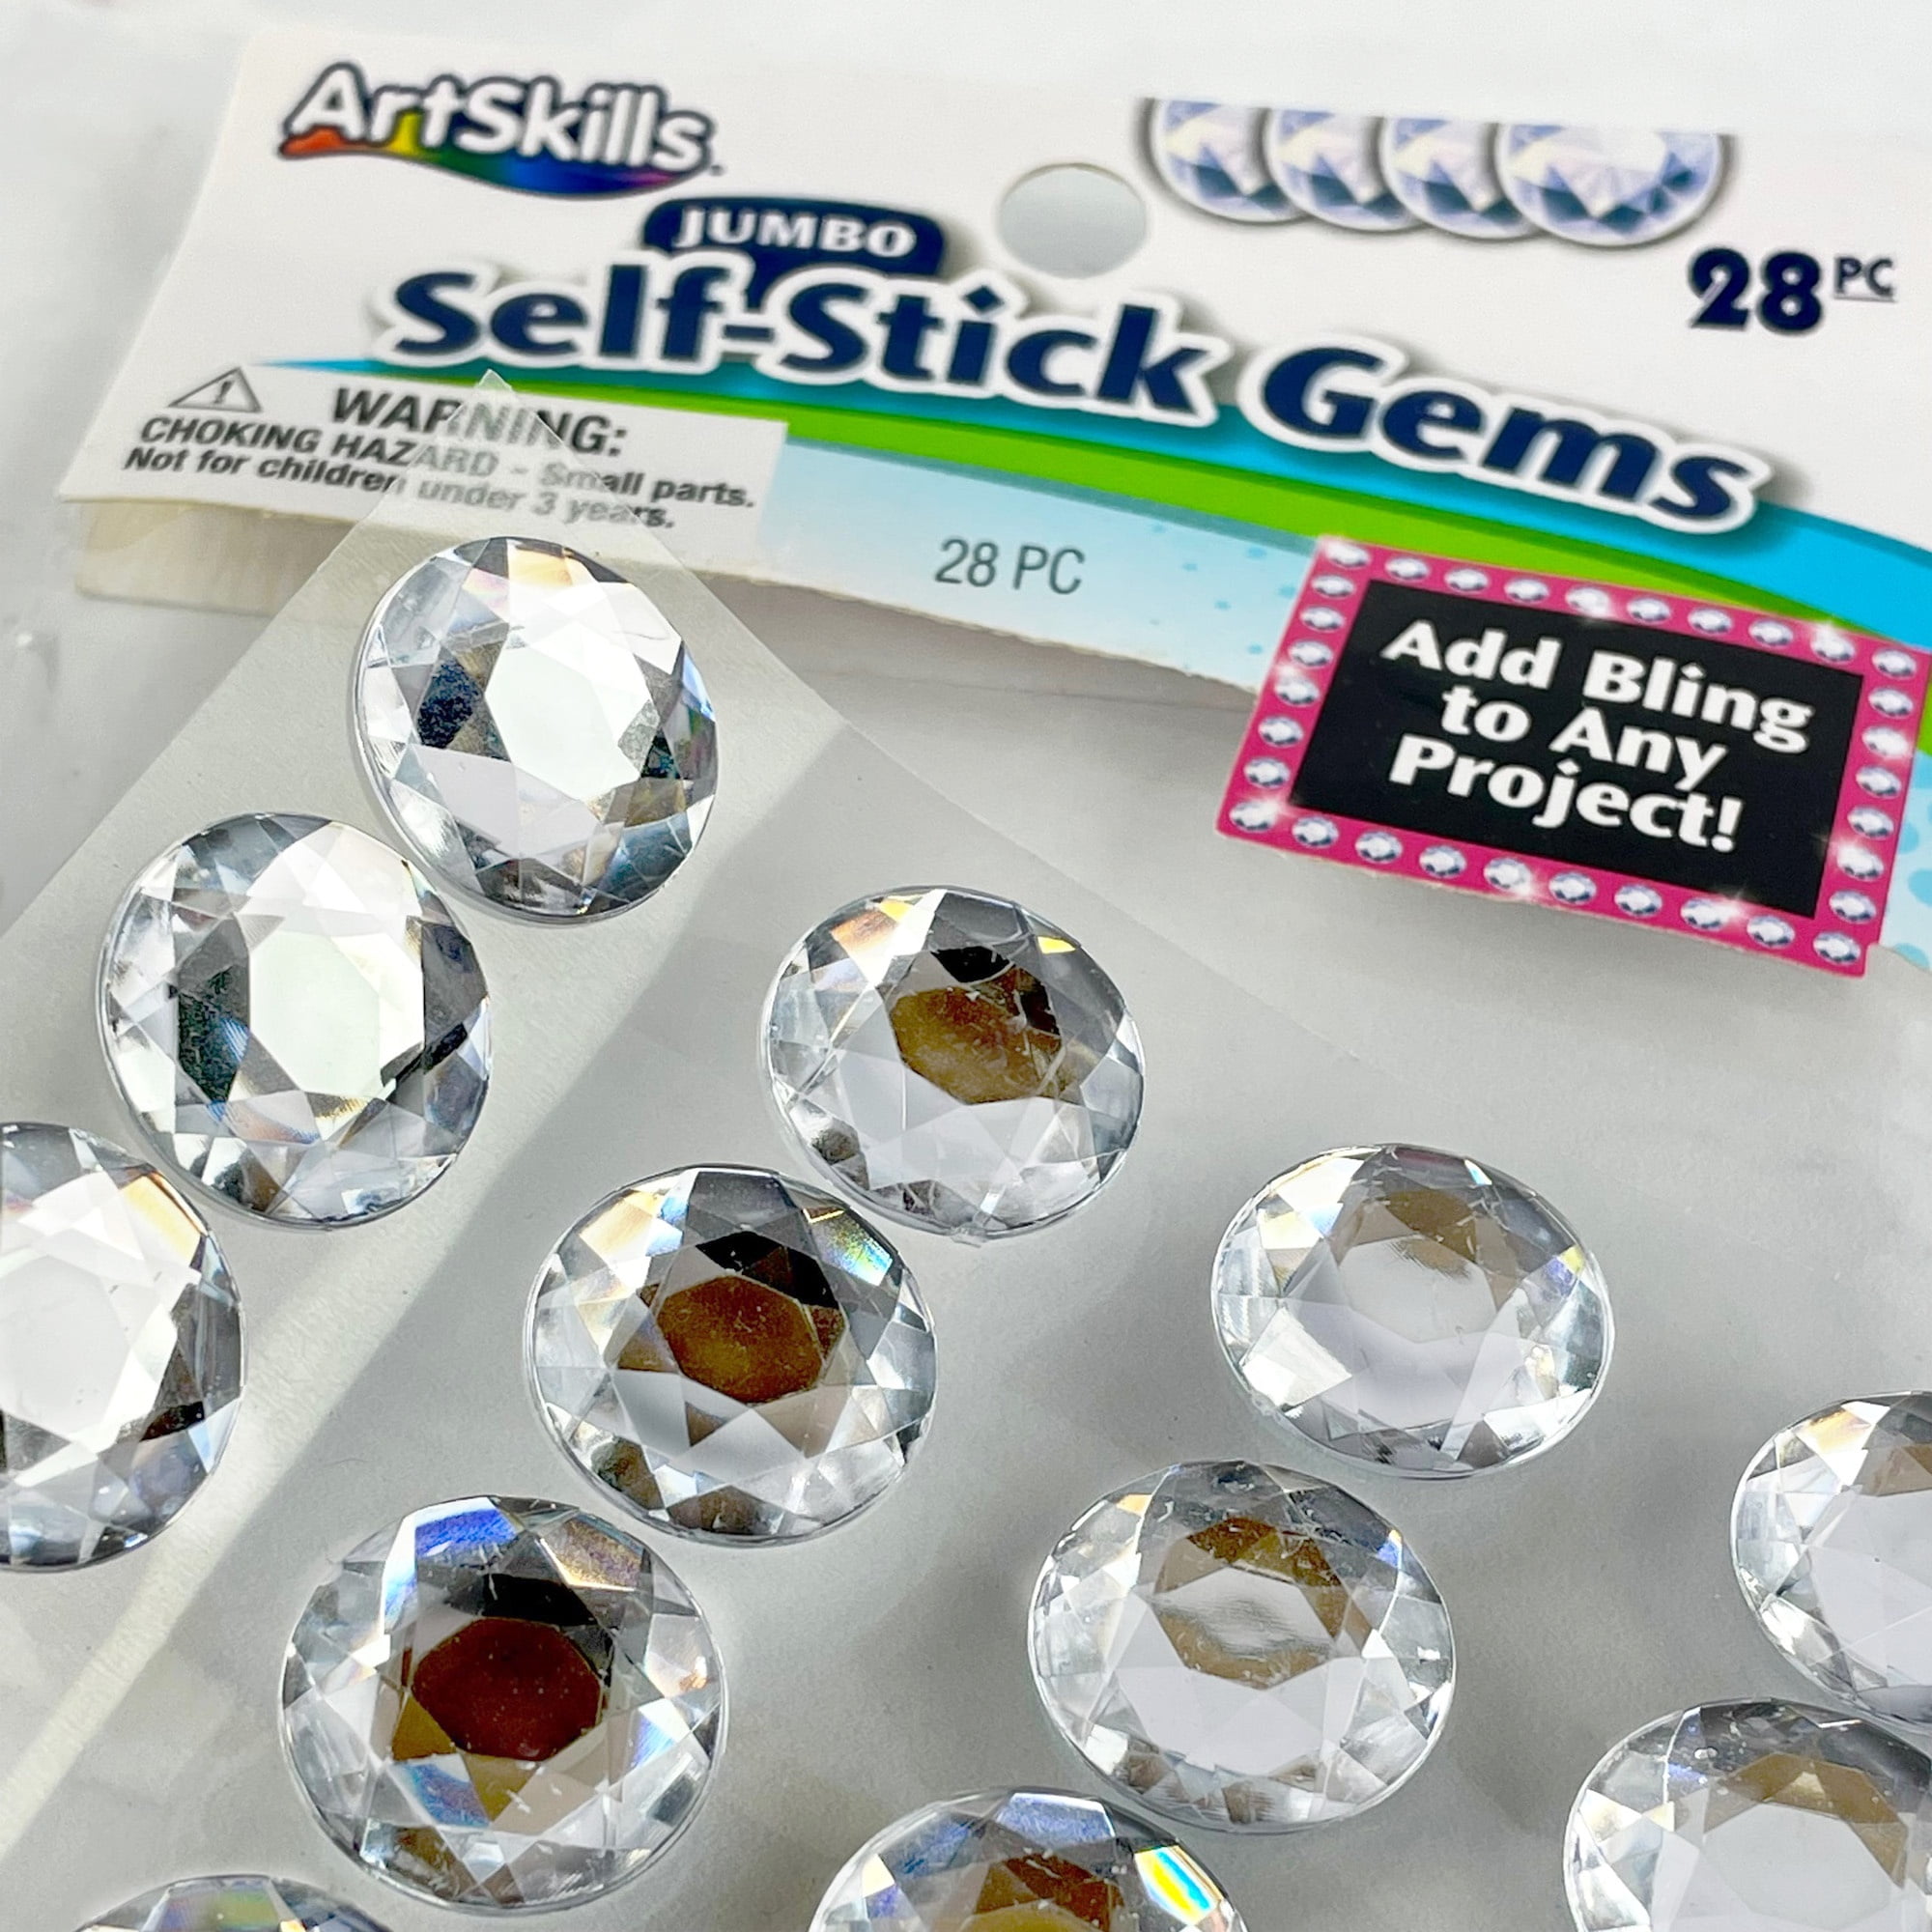 Reviews for ArtSkills 1.25 in. Silver Glitter and Gem Alphabet Letter  Stickers for Crafts (72-Pieces)